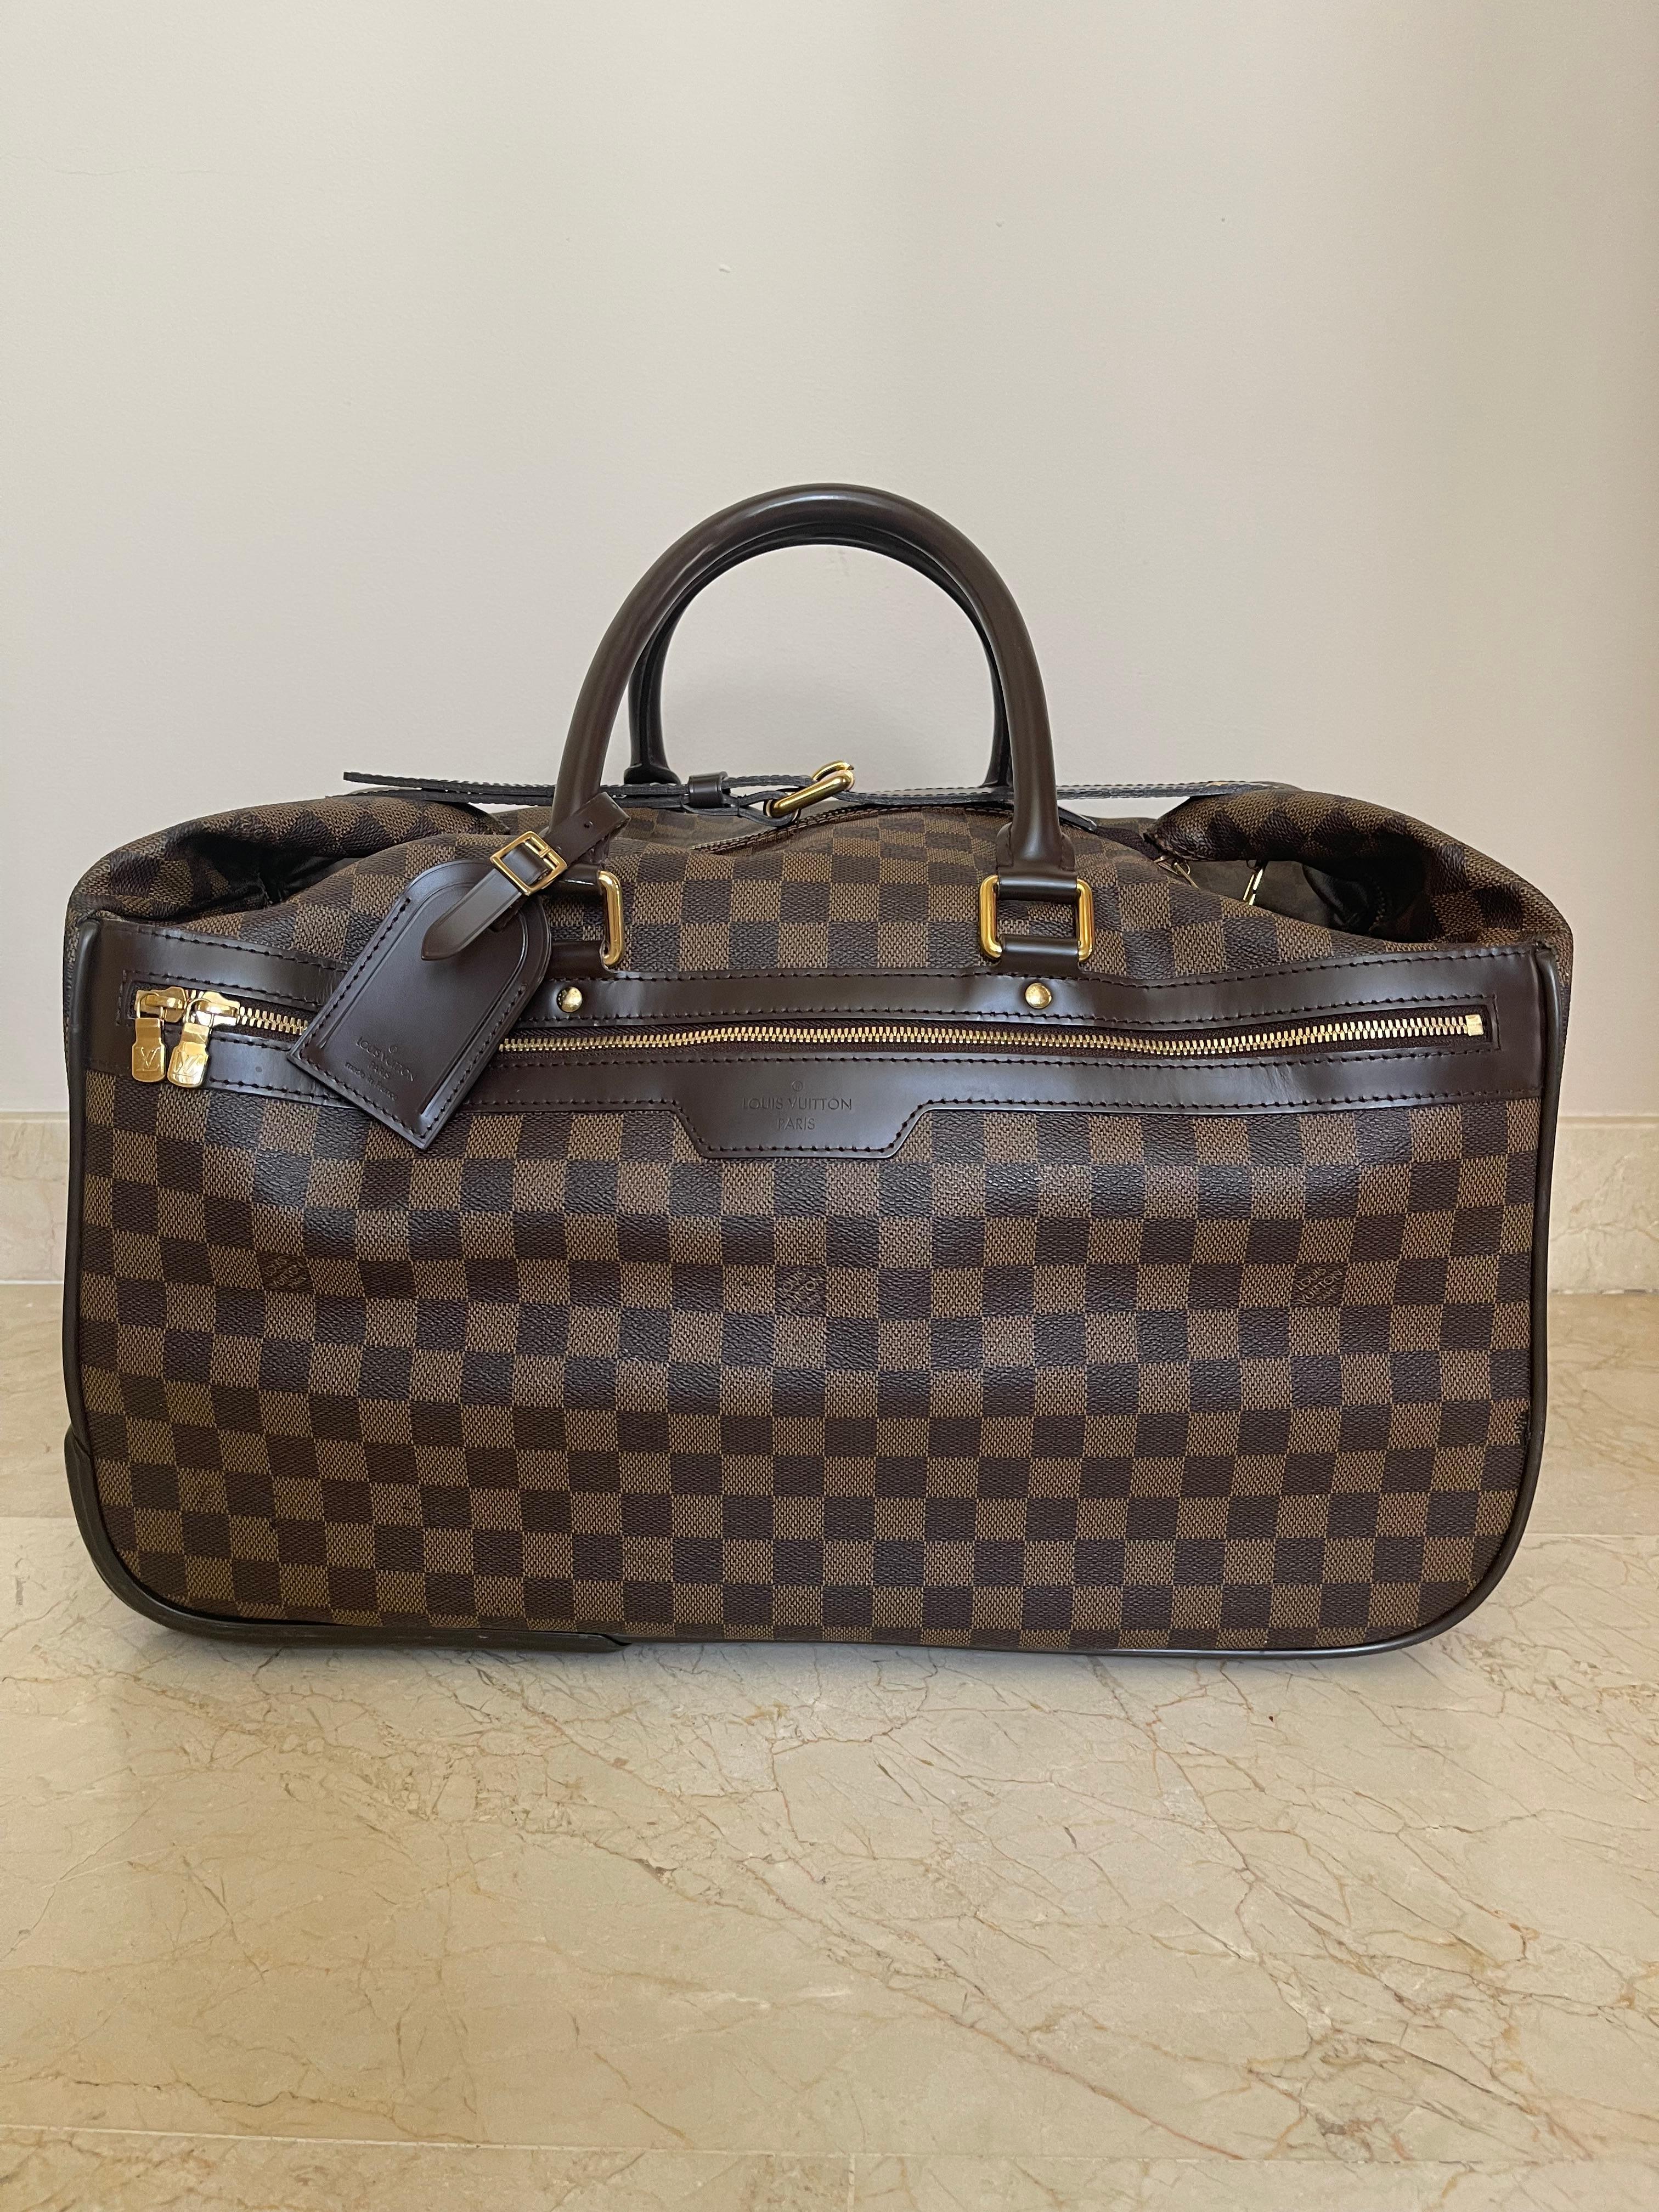 Louis Vuitton Eole Canvas Travel Bag
Louis Vuitton Eole suitcase in brown checkerboard canvas. Rectangular shape. Brown leather finish. Golden hardware. Two handles and a handle on the top. Front patch pocket with zipper. One main compartment with